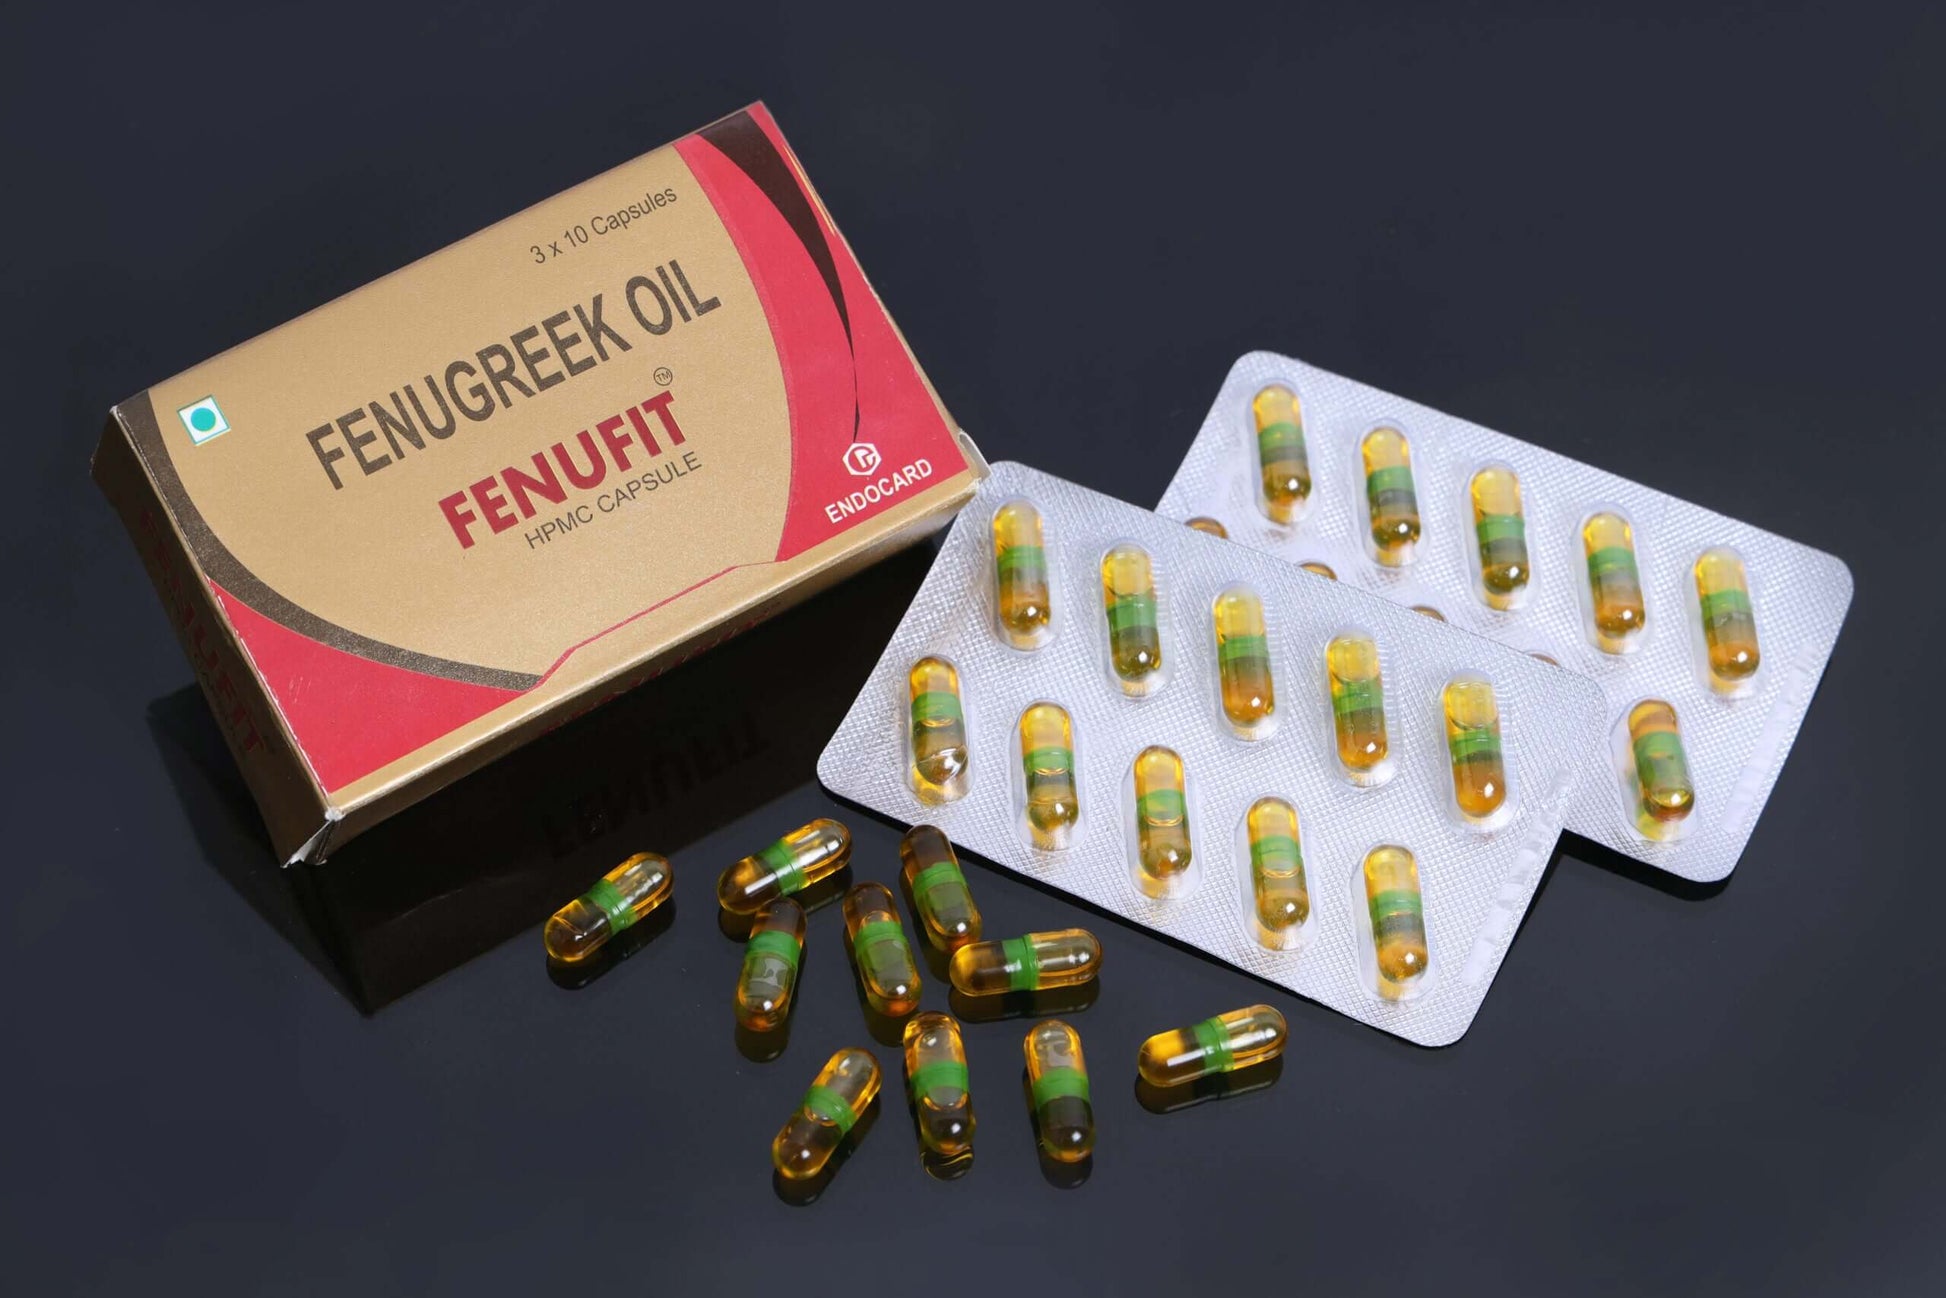 Fenugreek extract Capsule - Natural Supplement for Hair Growth and Wellness